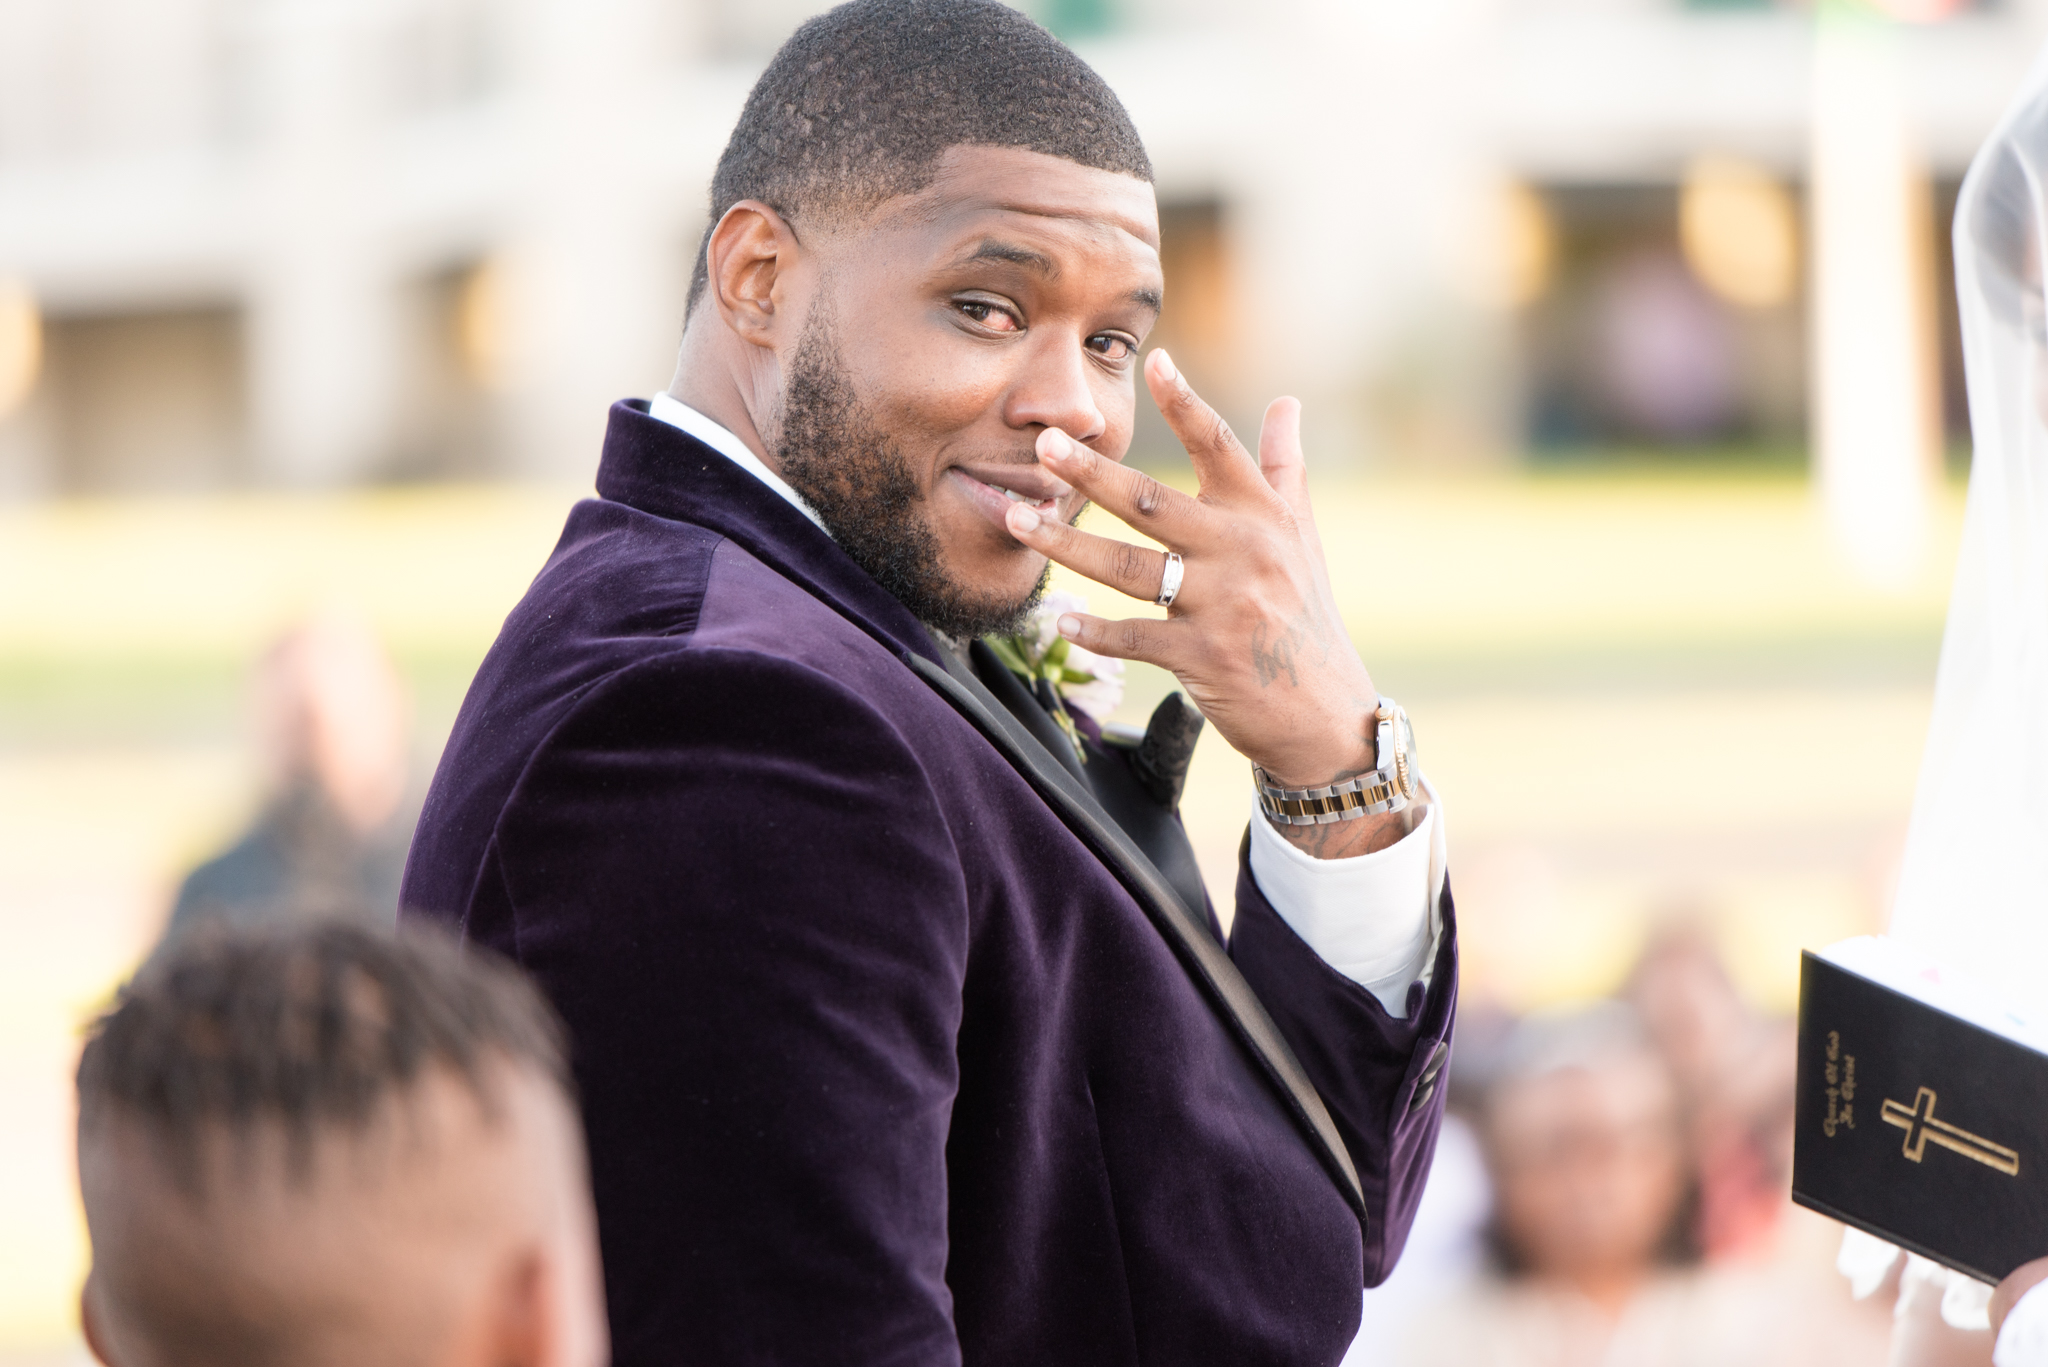 Groom shows off wedding ring during ceremony.